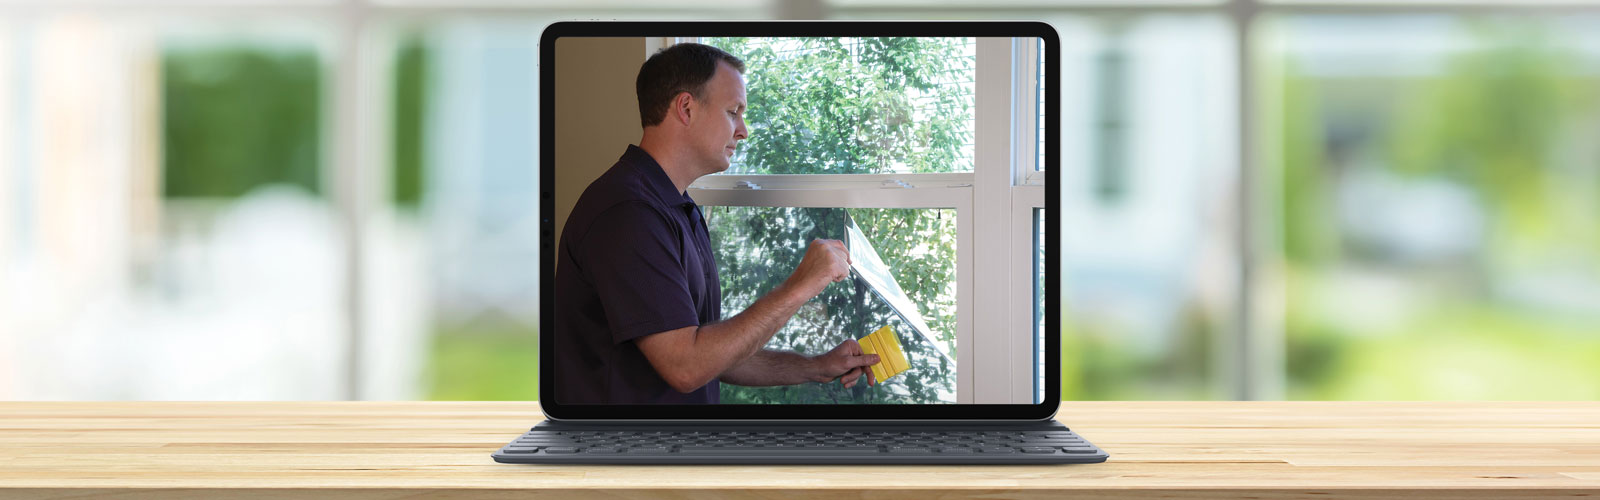 Gila home window film install video on personal device 